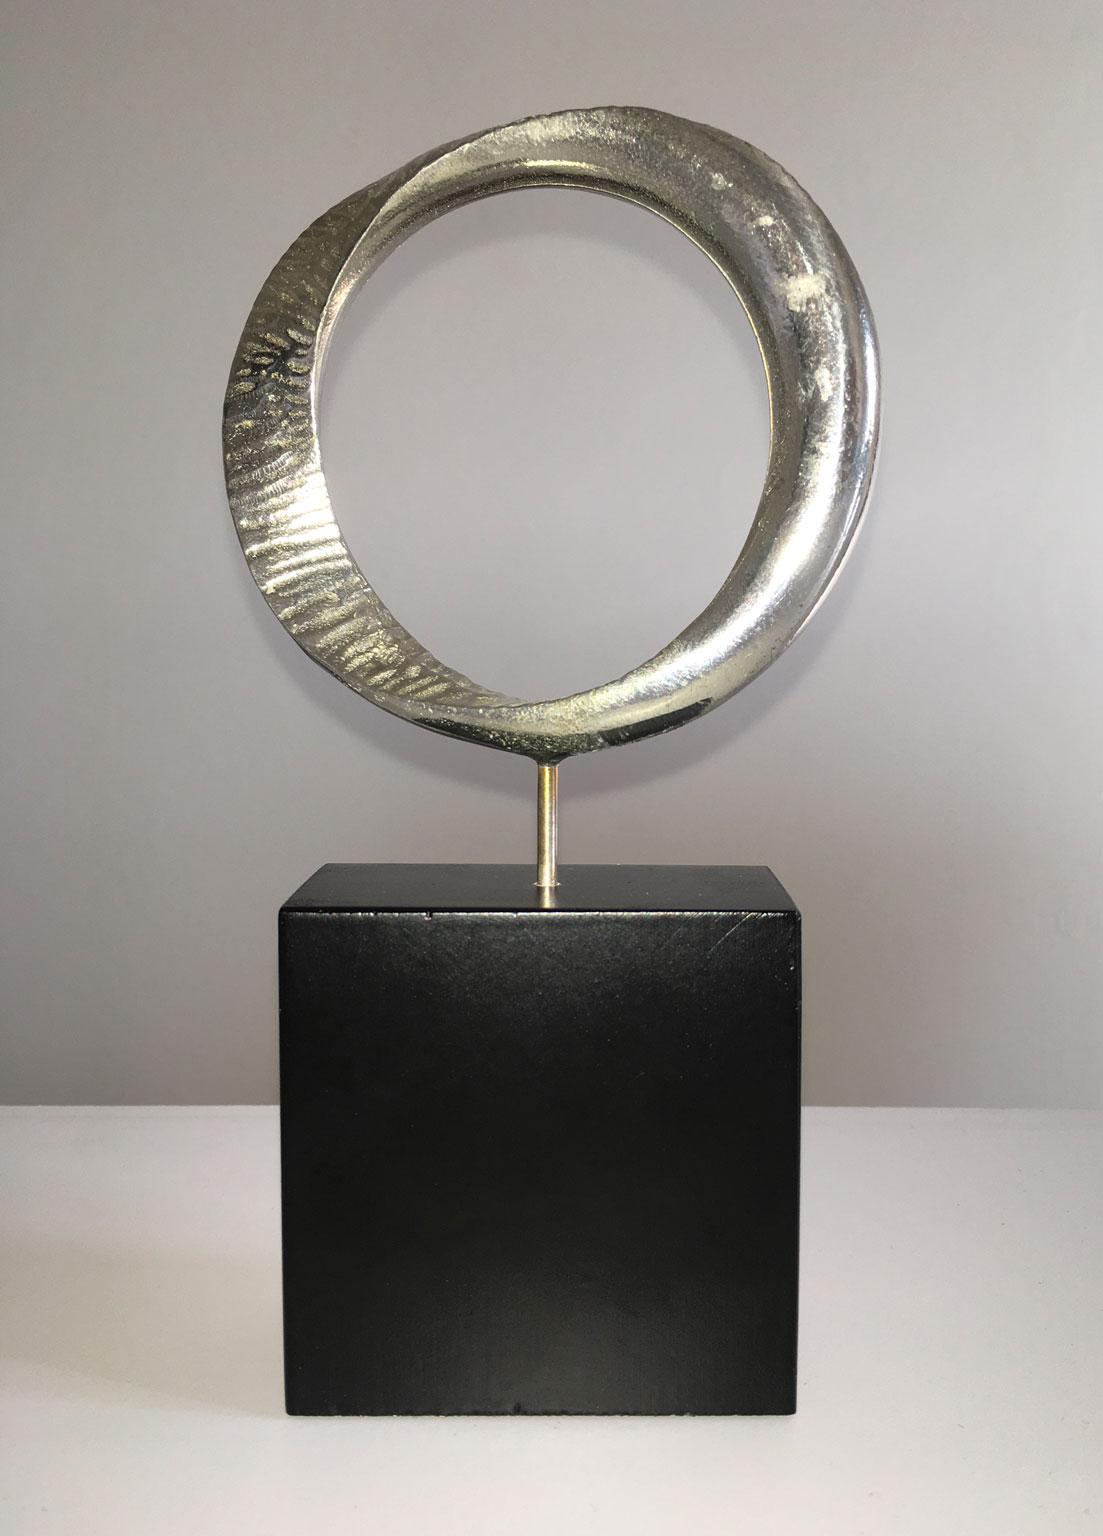 This artwork was created by the artist Jiro Sugawara, the title is "Circle"
Jiro Sugawara is a post-war artist and he was born in Japon in 1941. He studied sculpture at the Tokyo Department of 
Art and Sculpture.
He won numerous prizes in Japan and